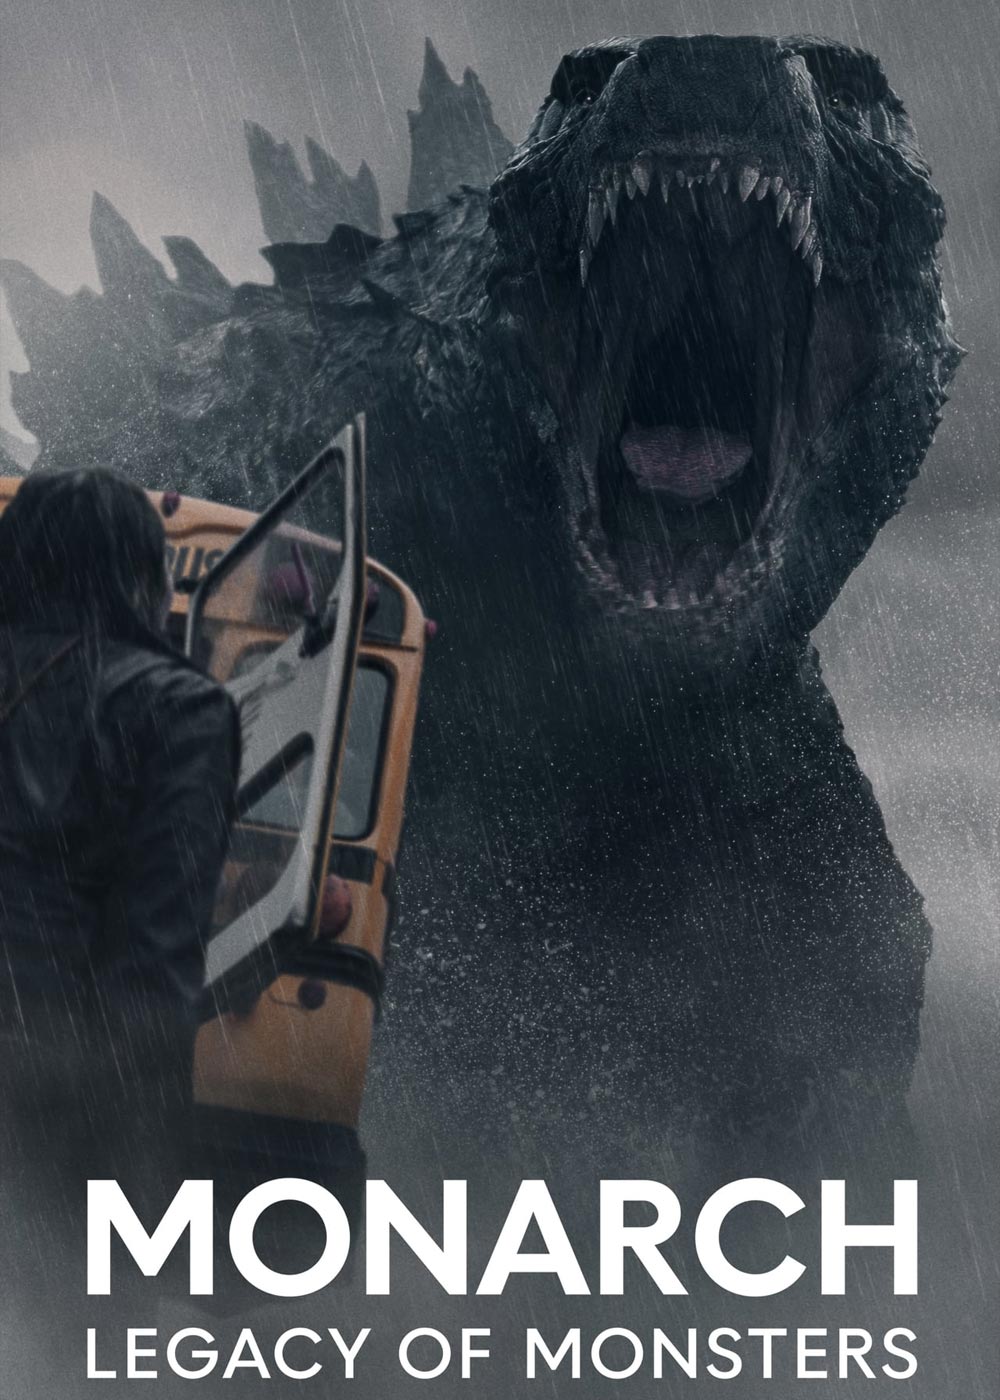 Monarch: Legacy of Monsters Hindi Dubbed Movie Download Filmyzilla FilmyMeet Filmywap